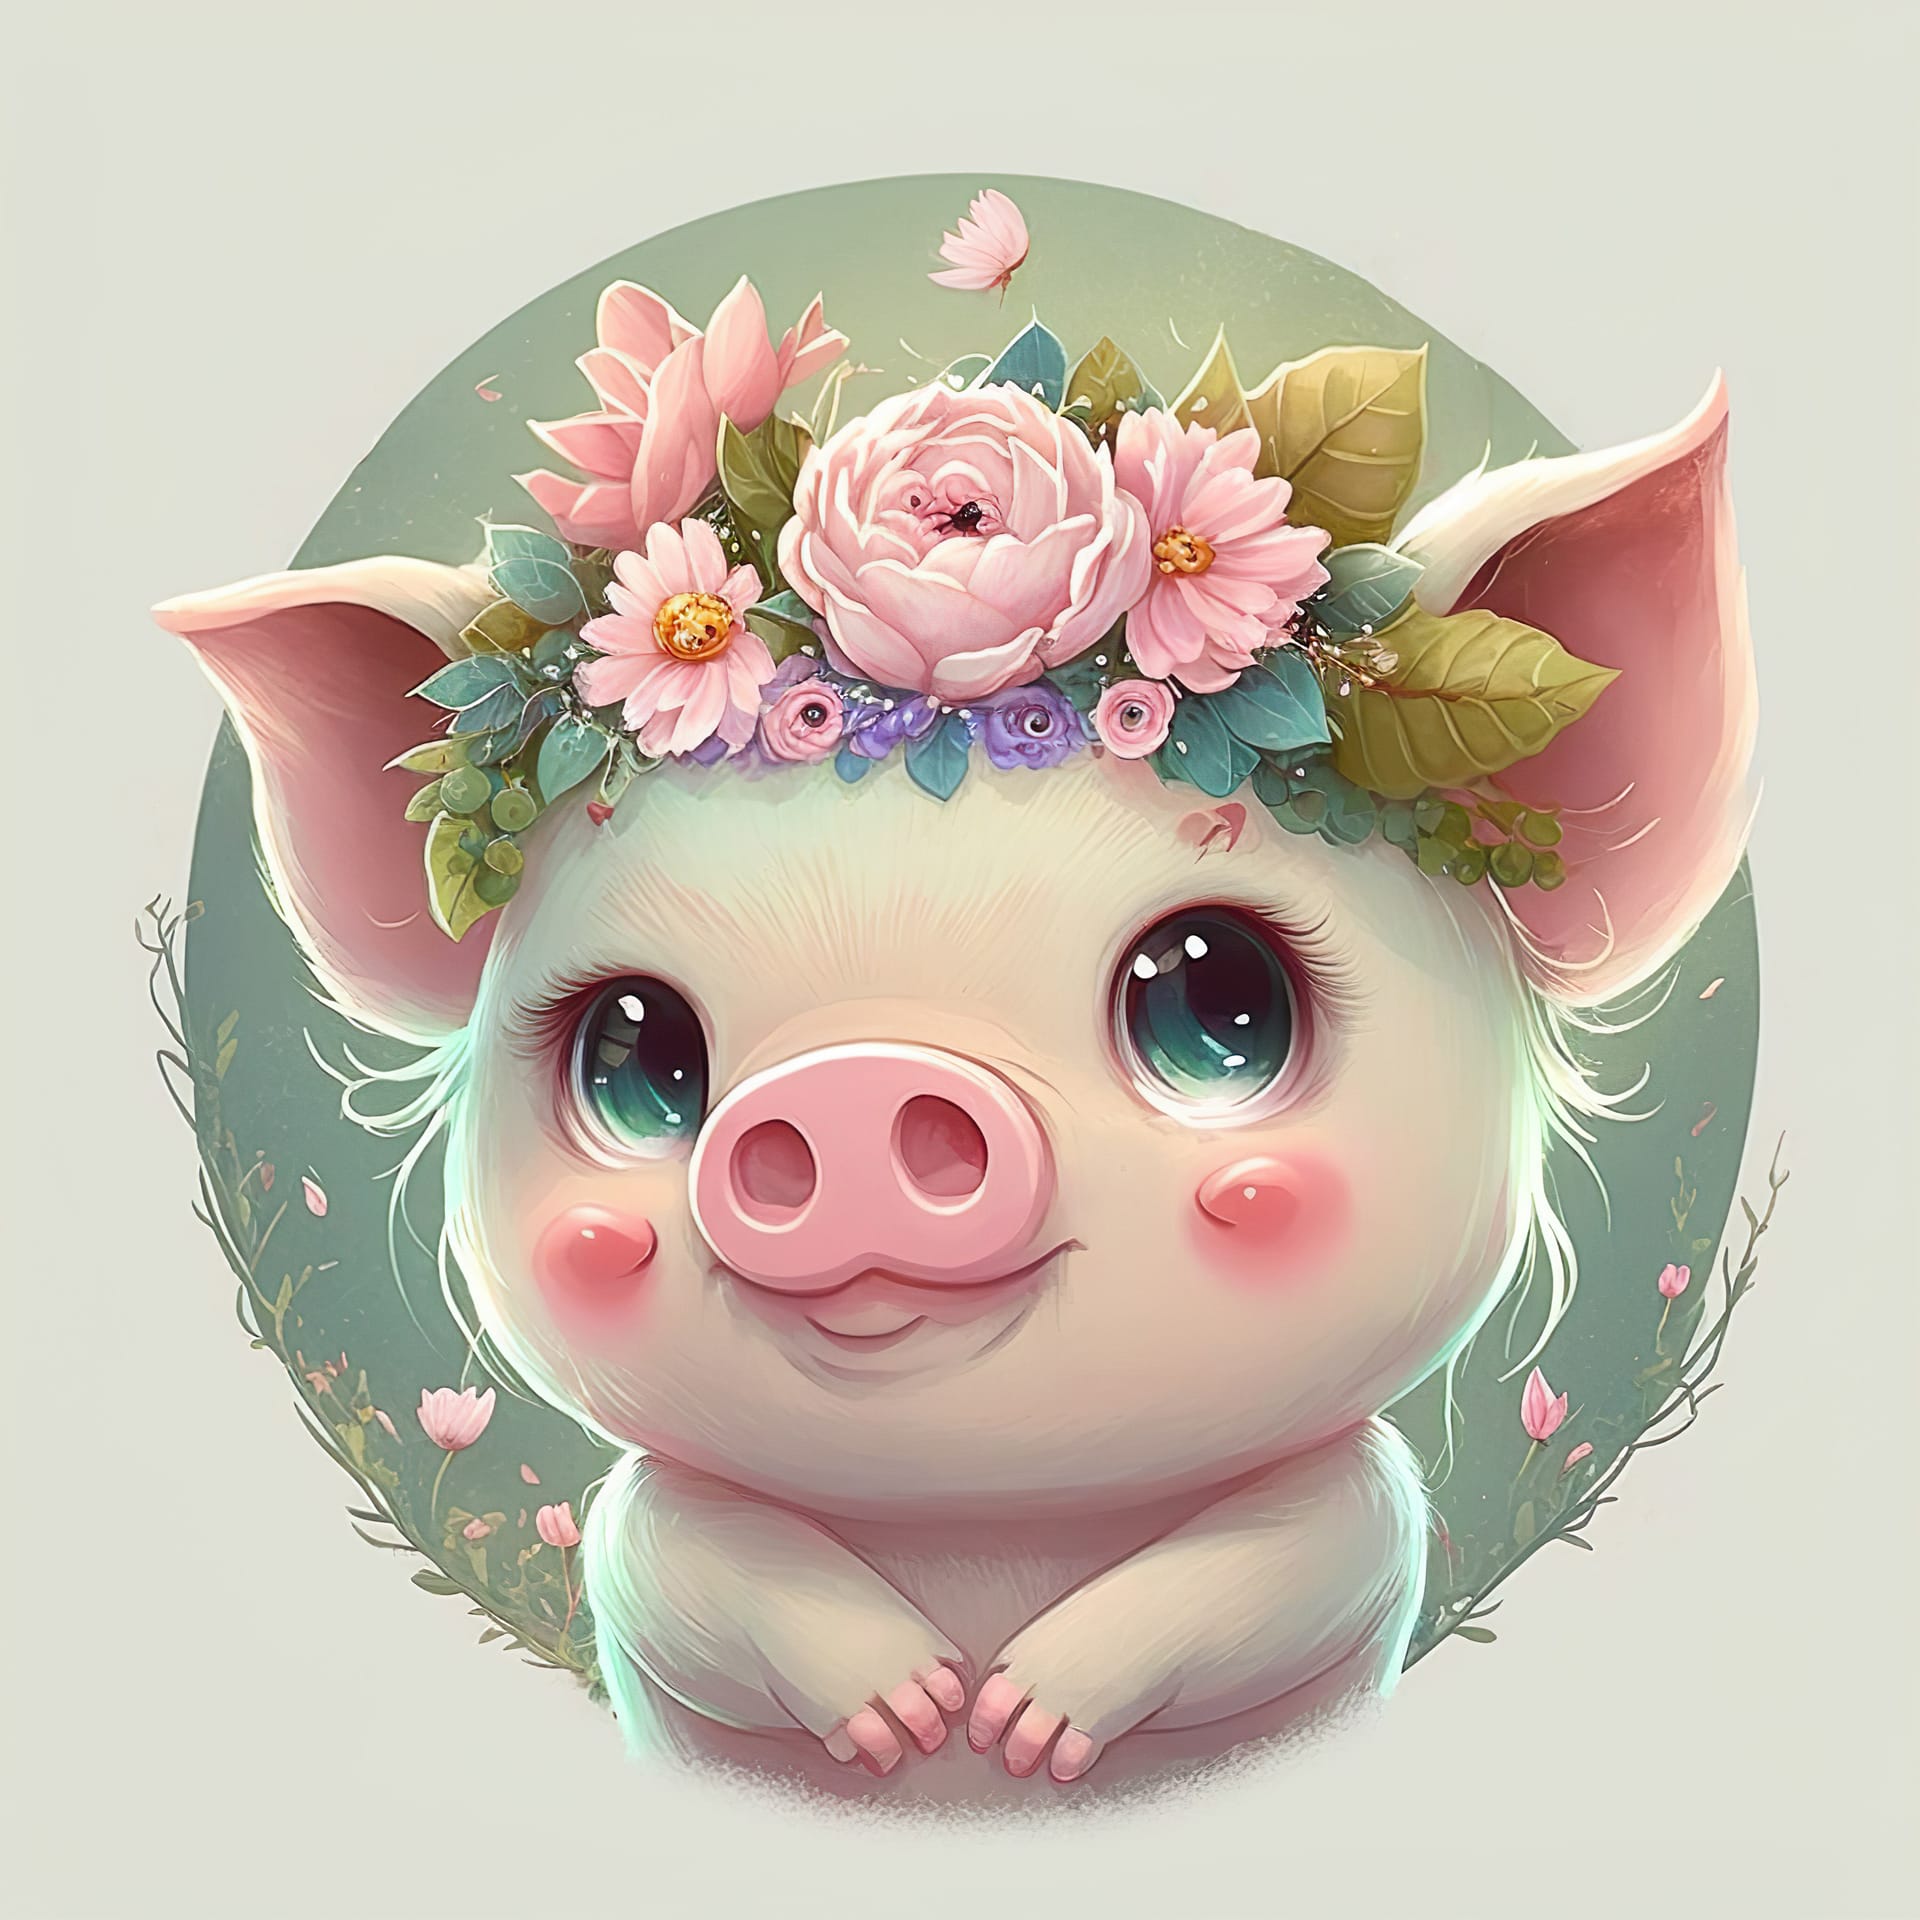 Cute cartoon pig love pigs tshirt poster cute animal profile pictures